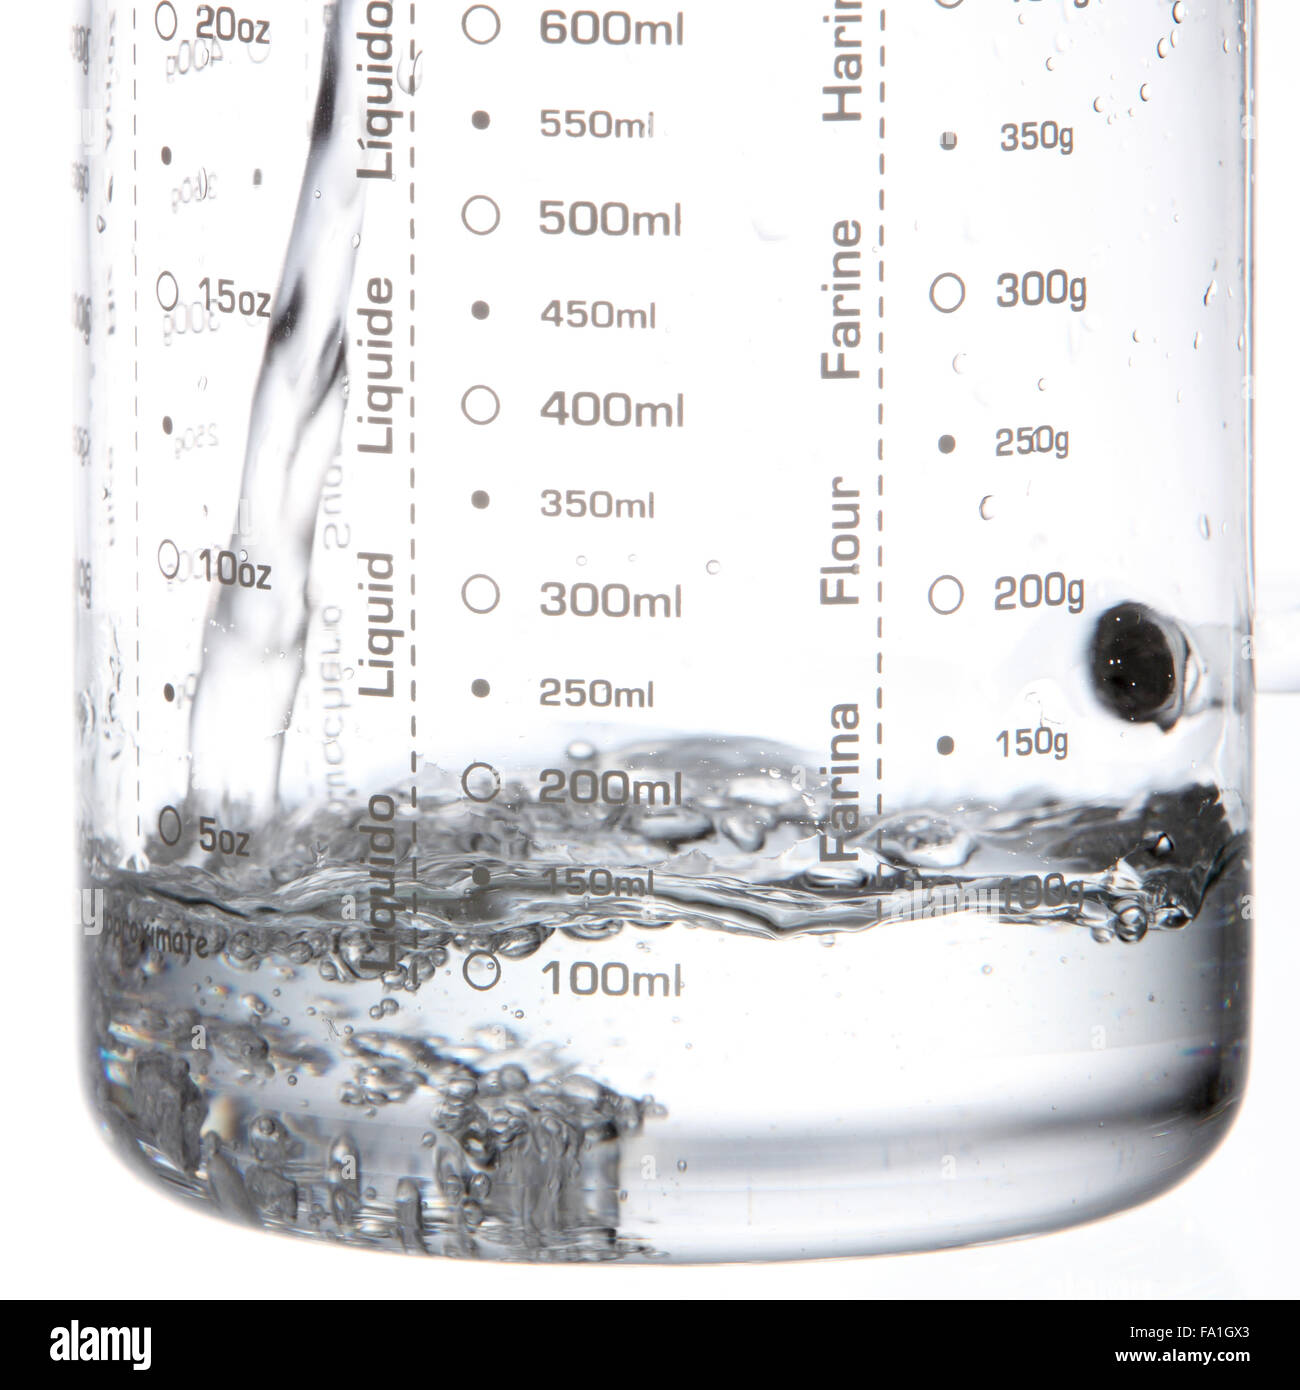 https://c8.alamy.com/comp/FA1GX3/pouring-water-in-to-measuring-jar-FA1GX3.jpg